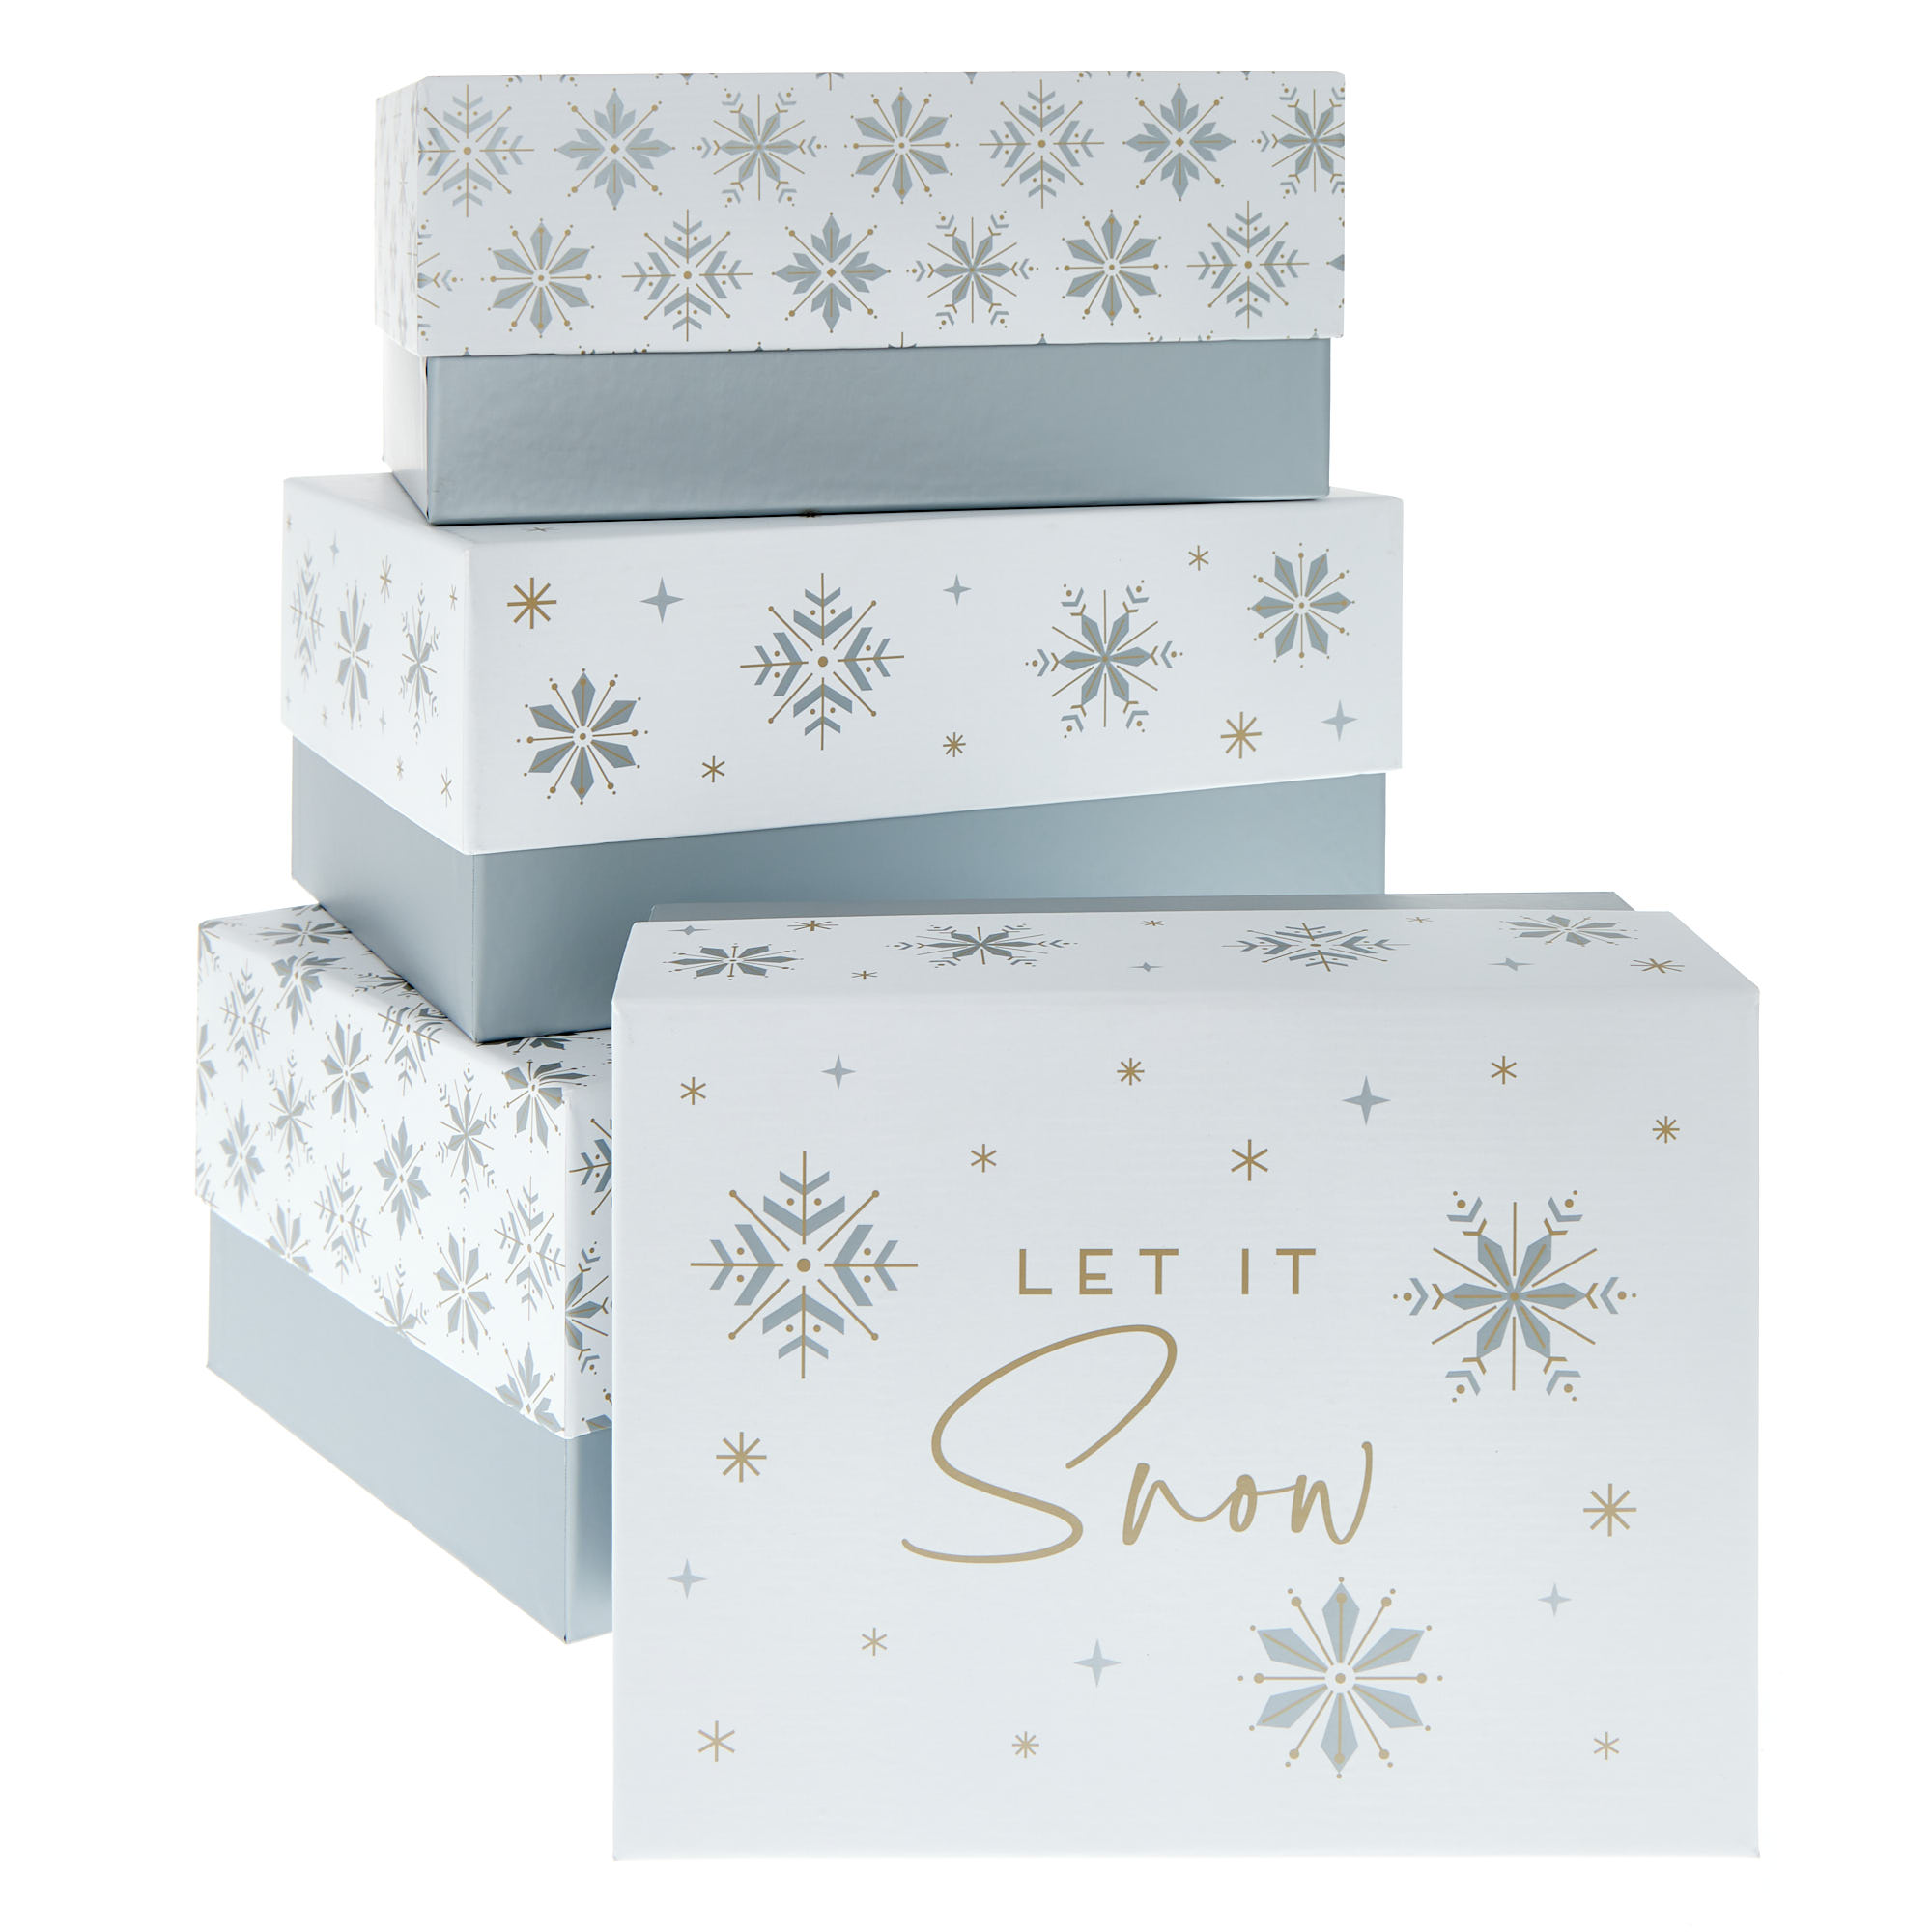 Let It Snow Gift Boxes - Set of 3